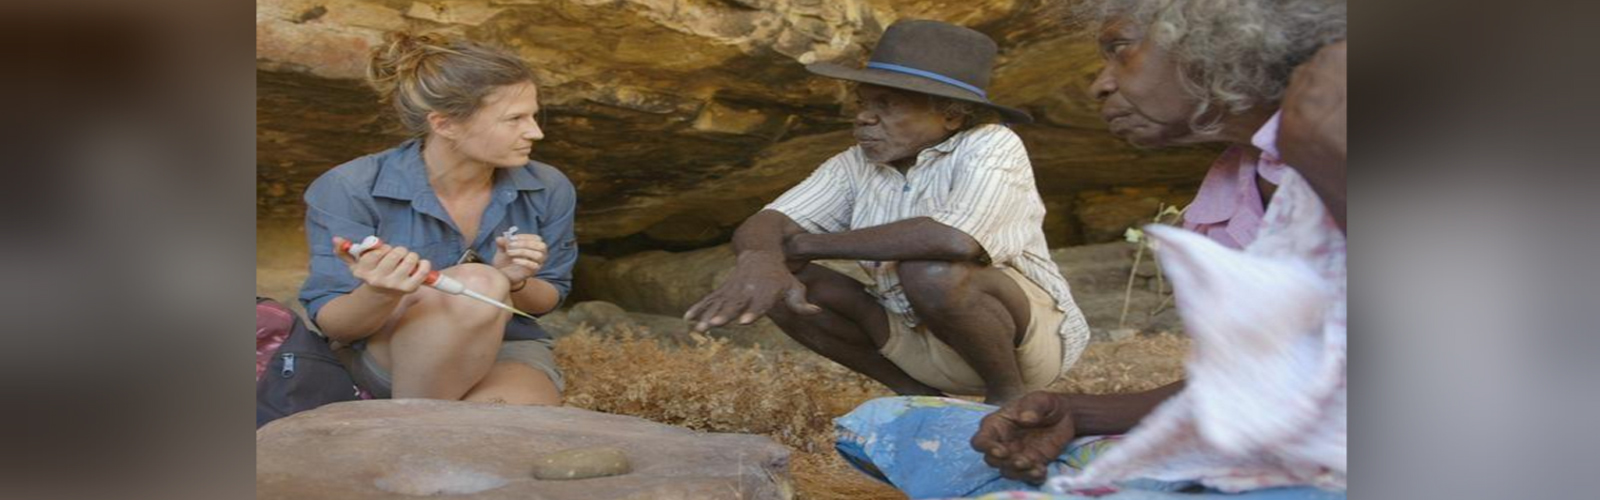 Outback axes suggest humans reached Australia 18,000 years earlier than thought